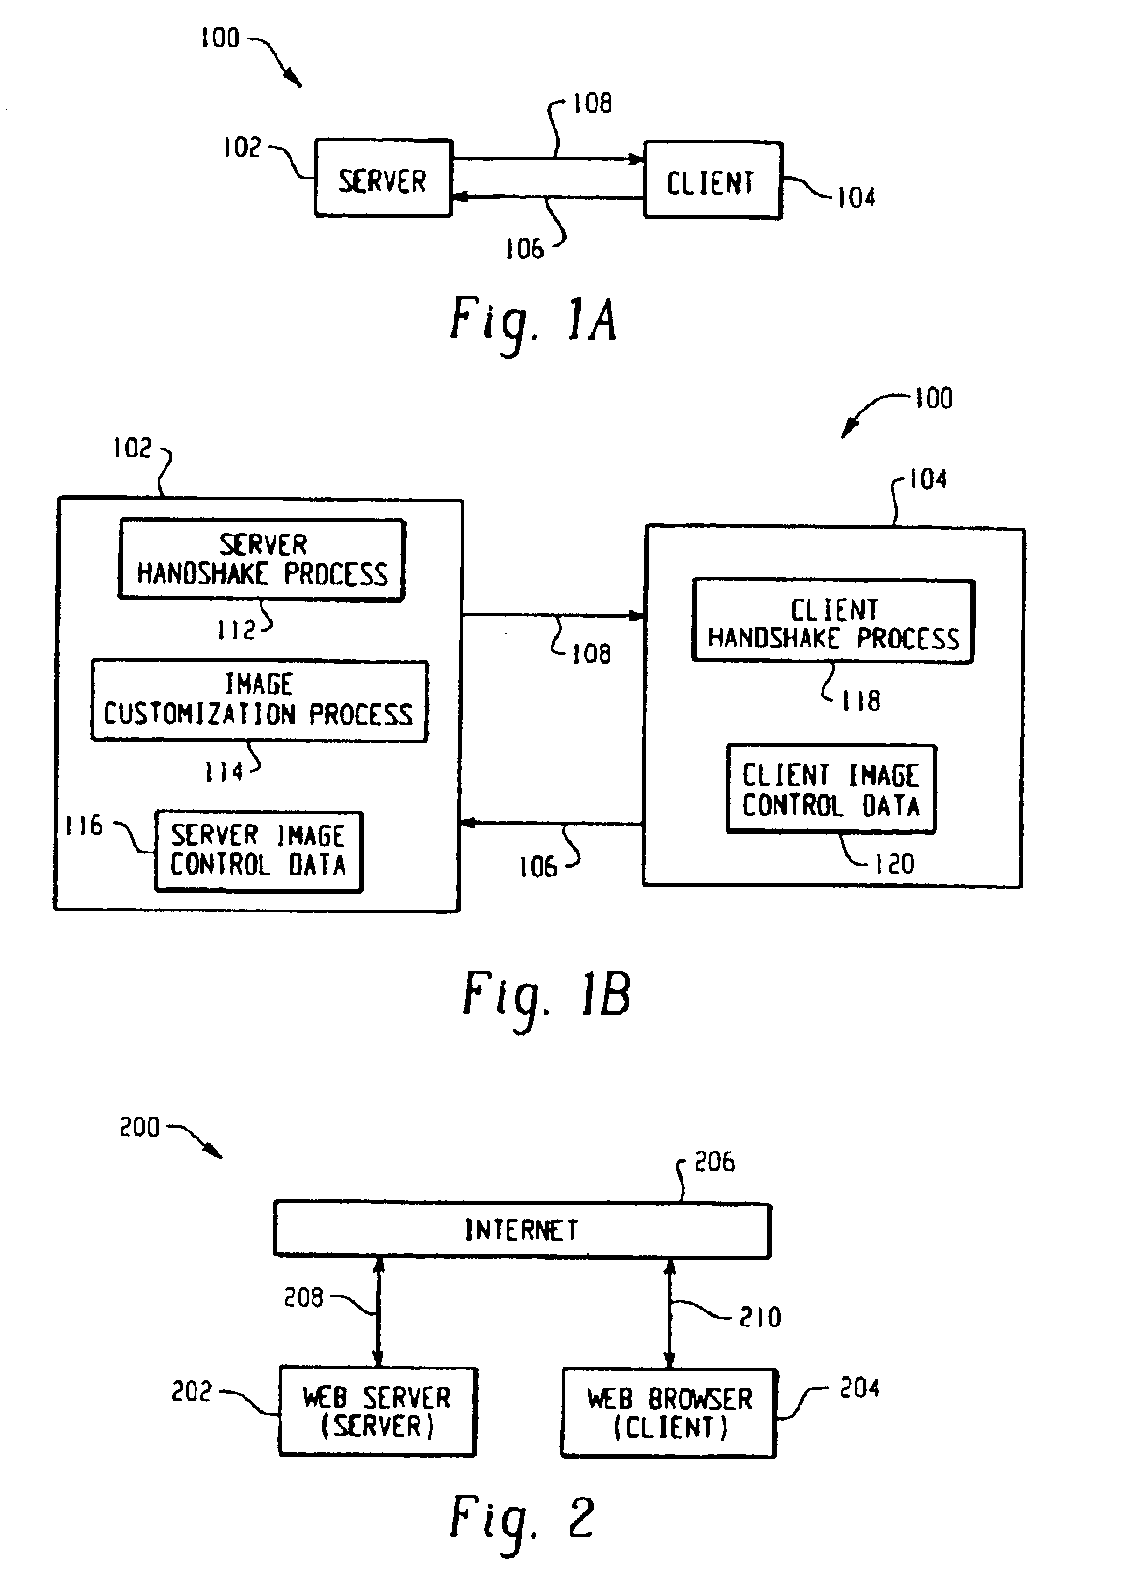 Computer implemented method and system for transmitting graphical images from server to client at user selectable resolution